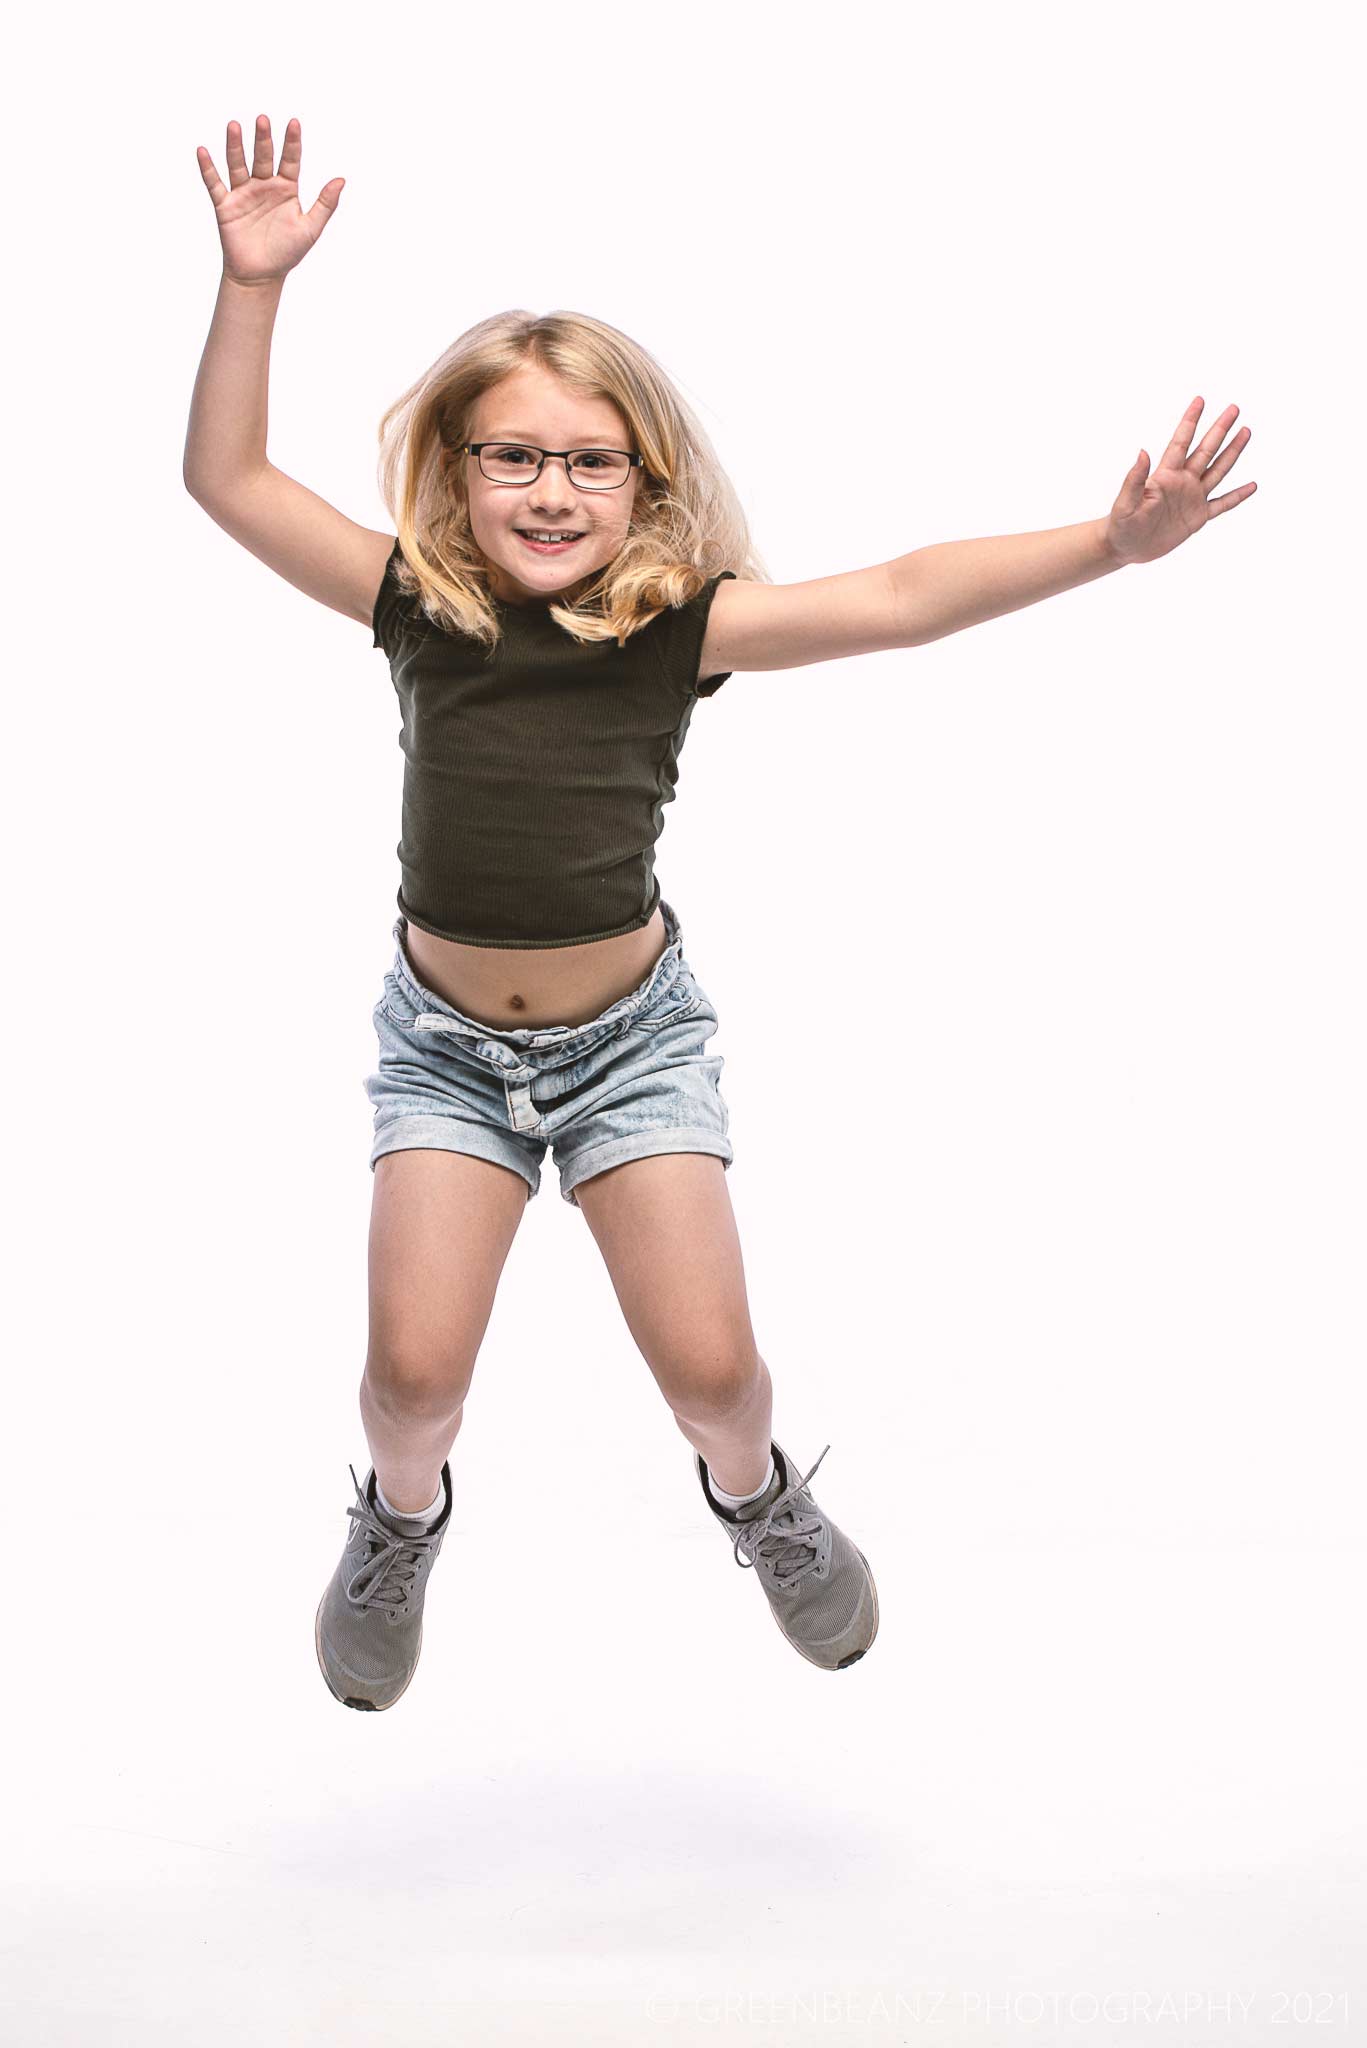 Plymouth young actress Bonnie jumping in studio shoot